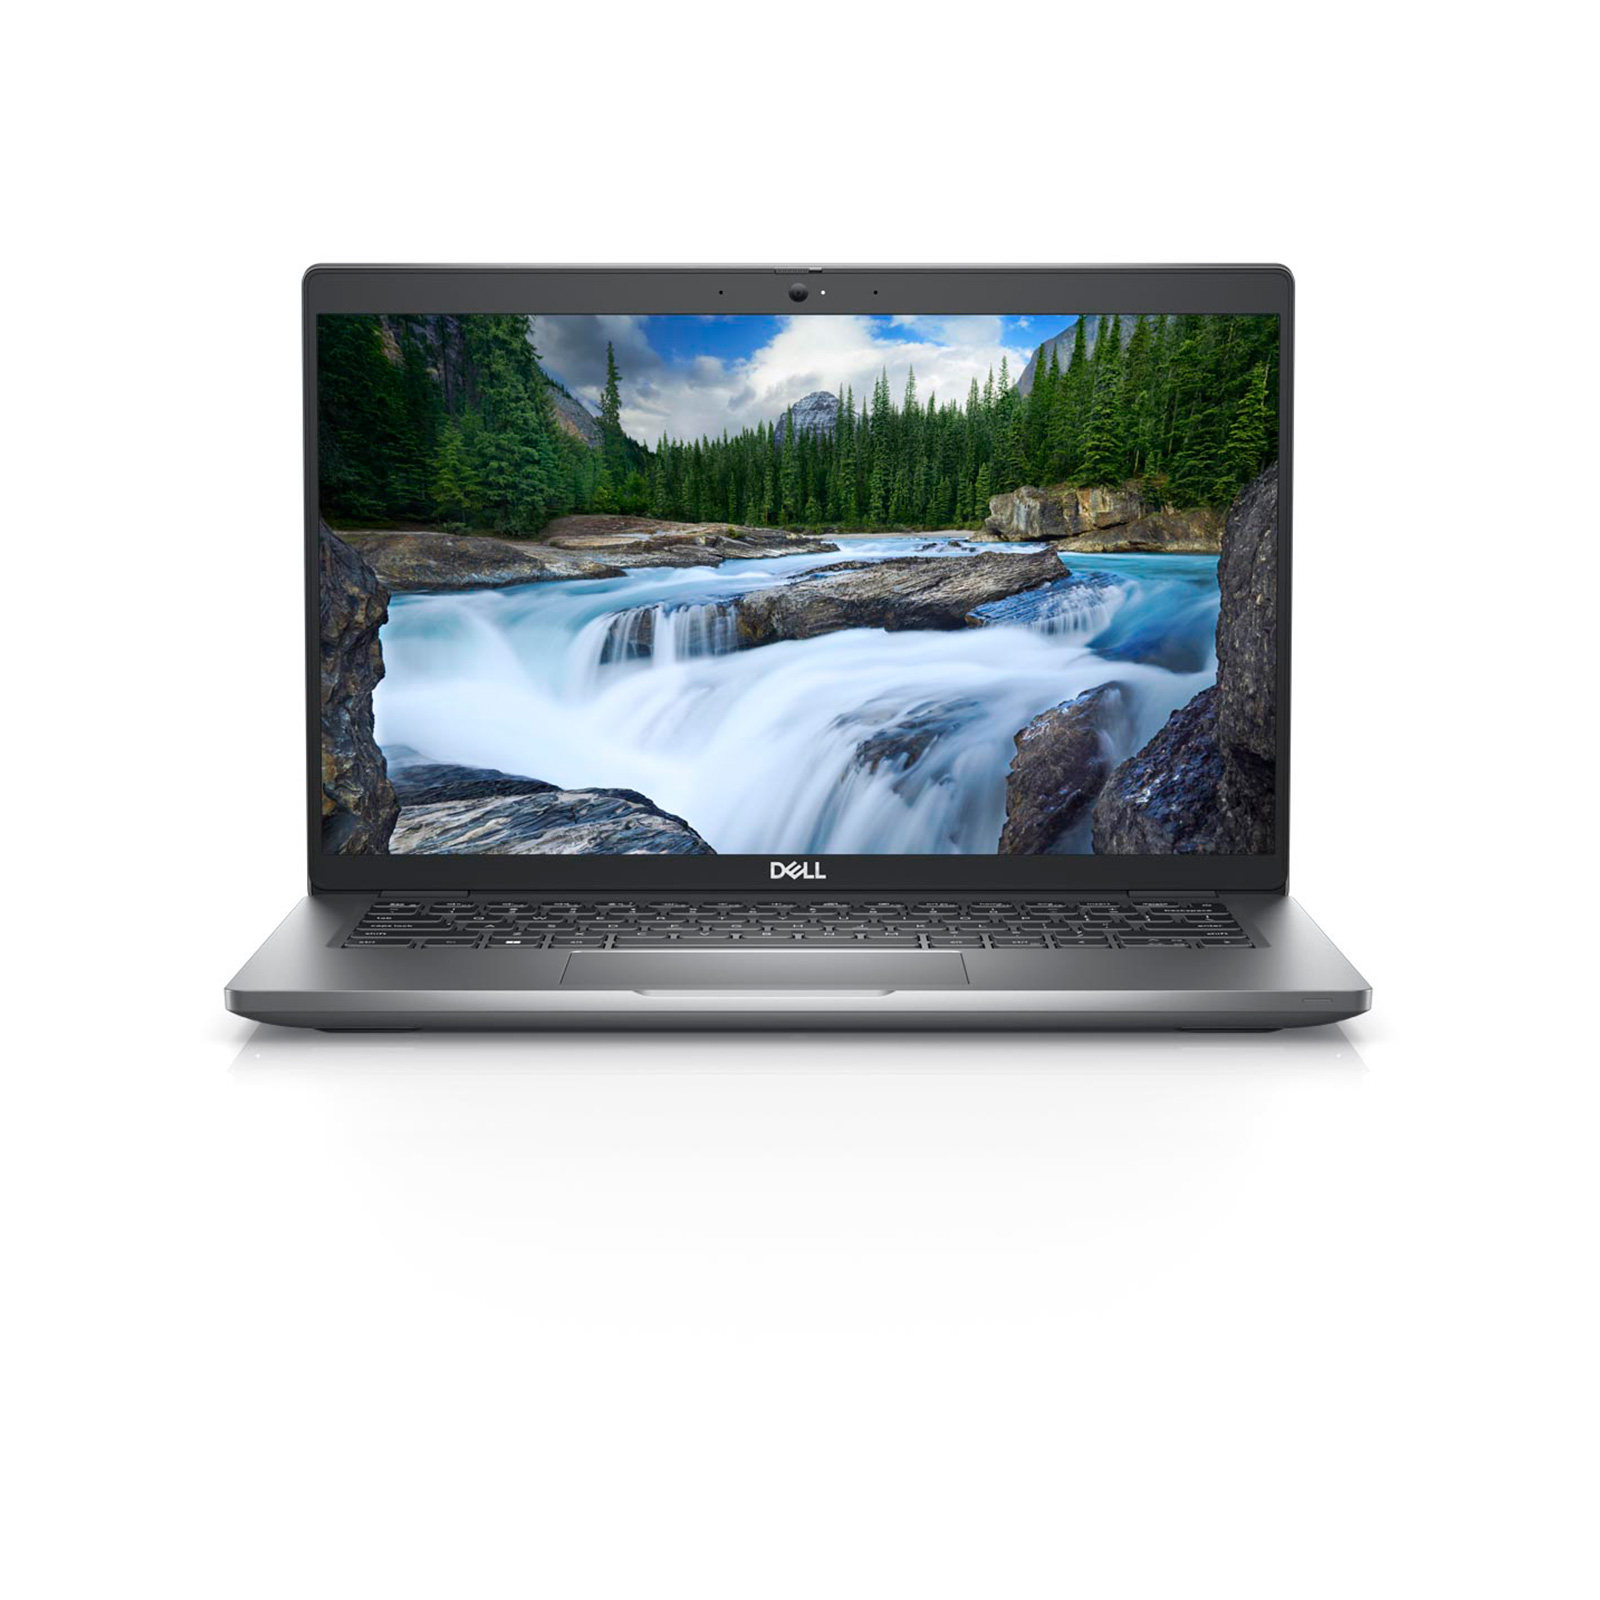 Dell-N201L5430MLK14EMEA-Dell-N201L5430MLK14EMEA-N201L5430MLK14EMEA-Laptops | LaptopSA.co.za a division of the notebook company 